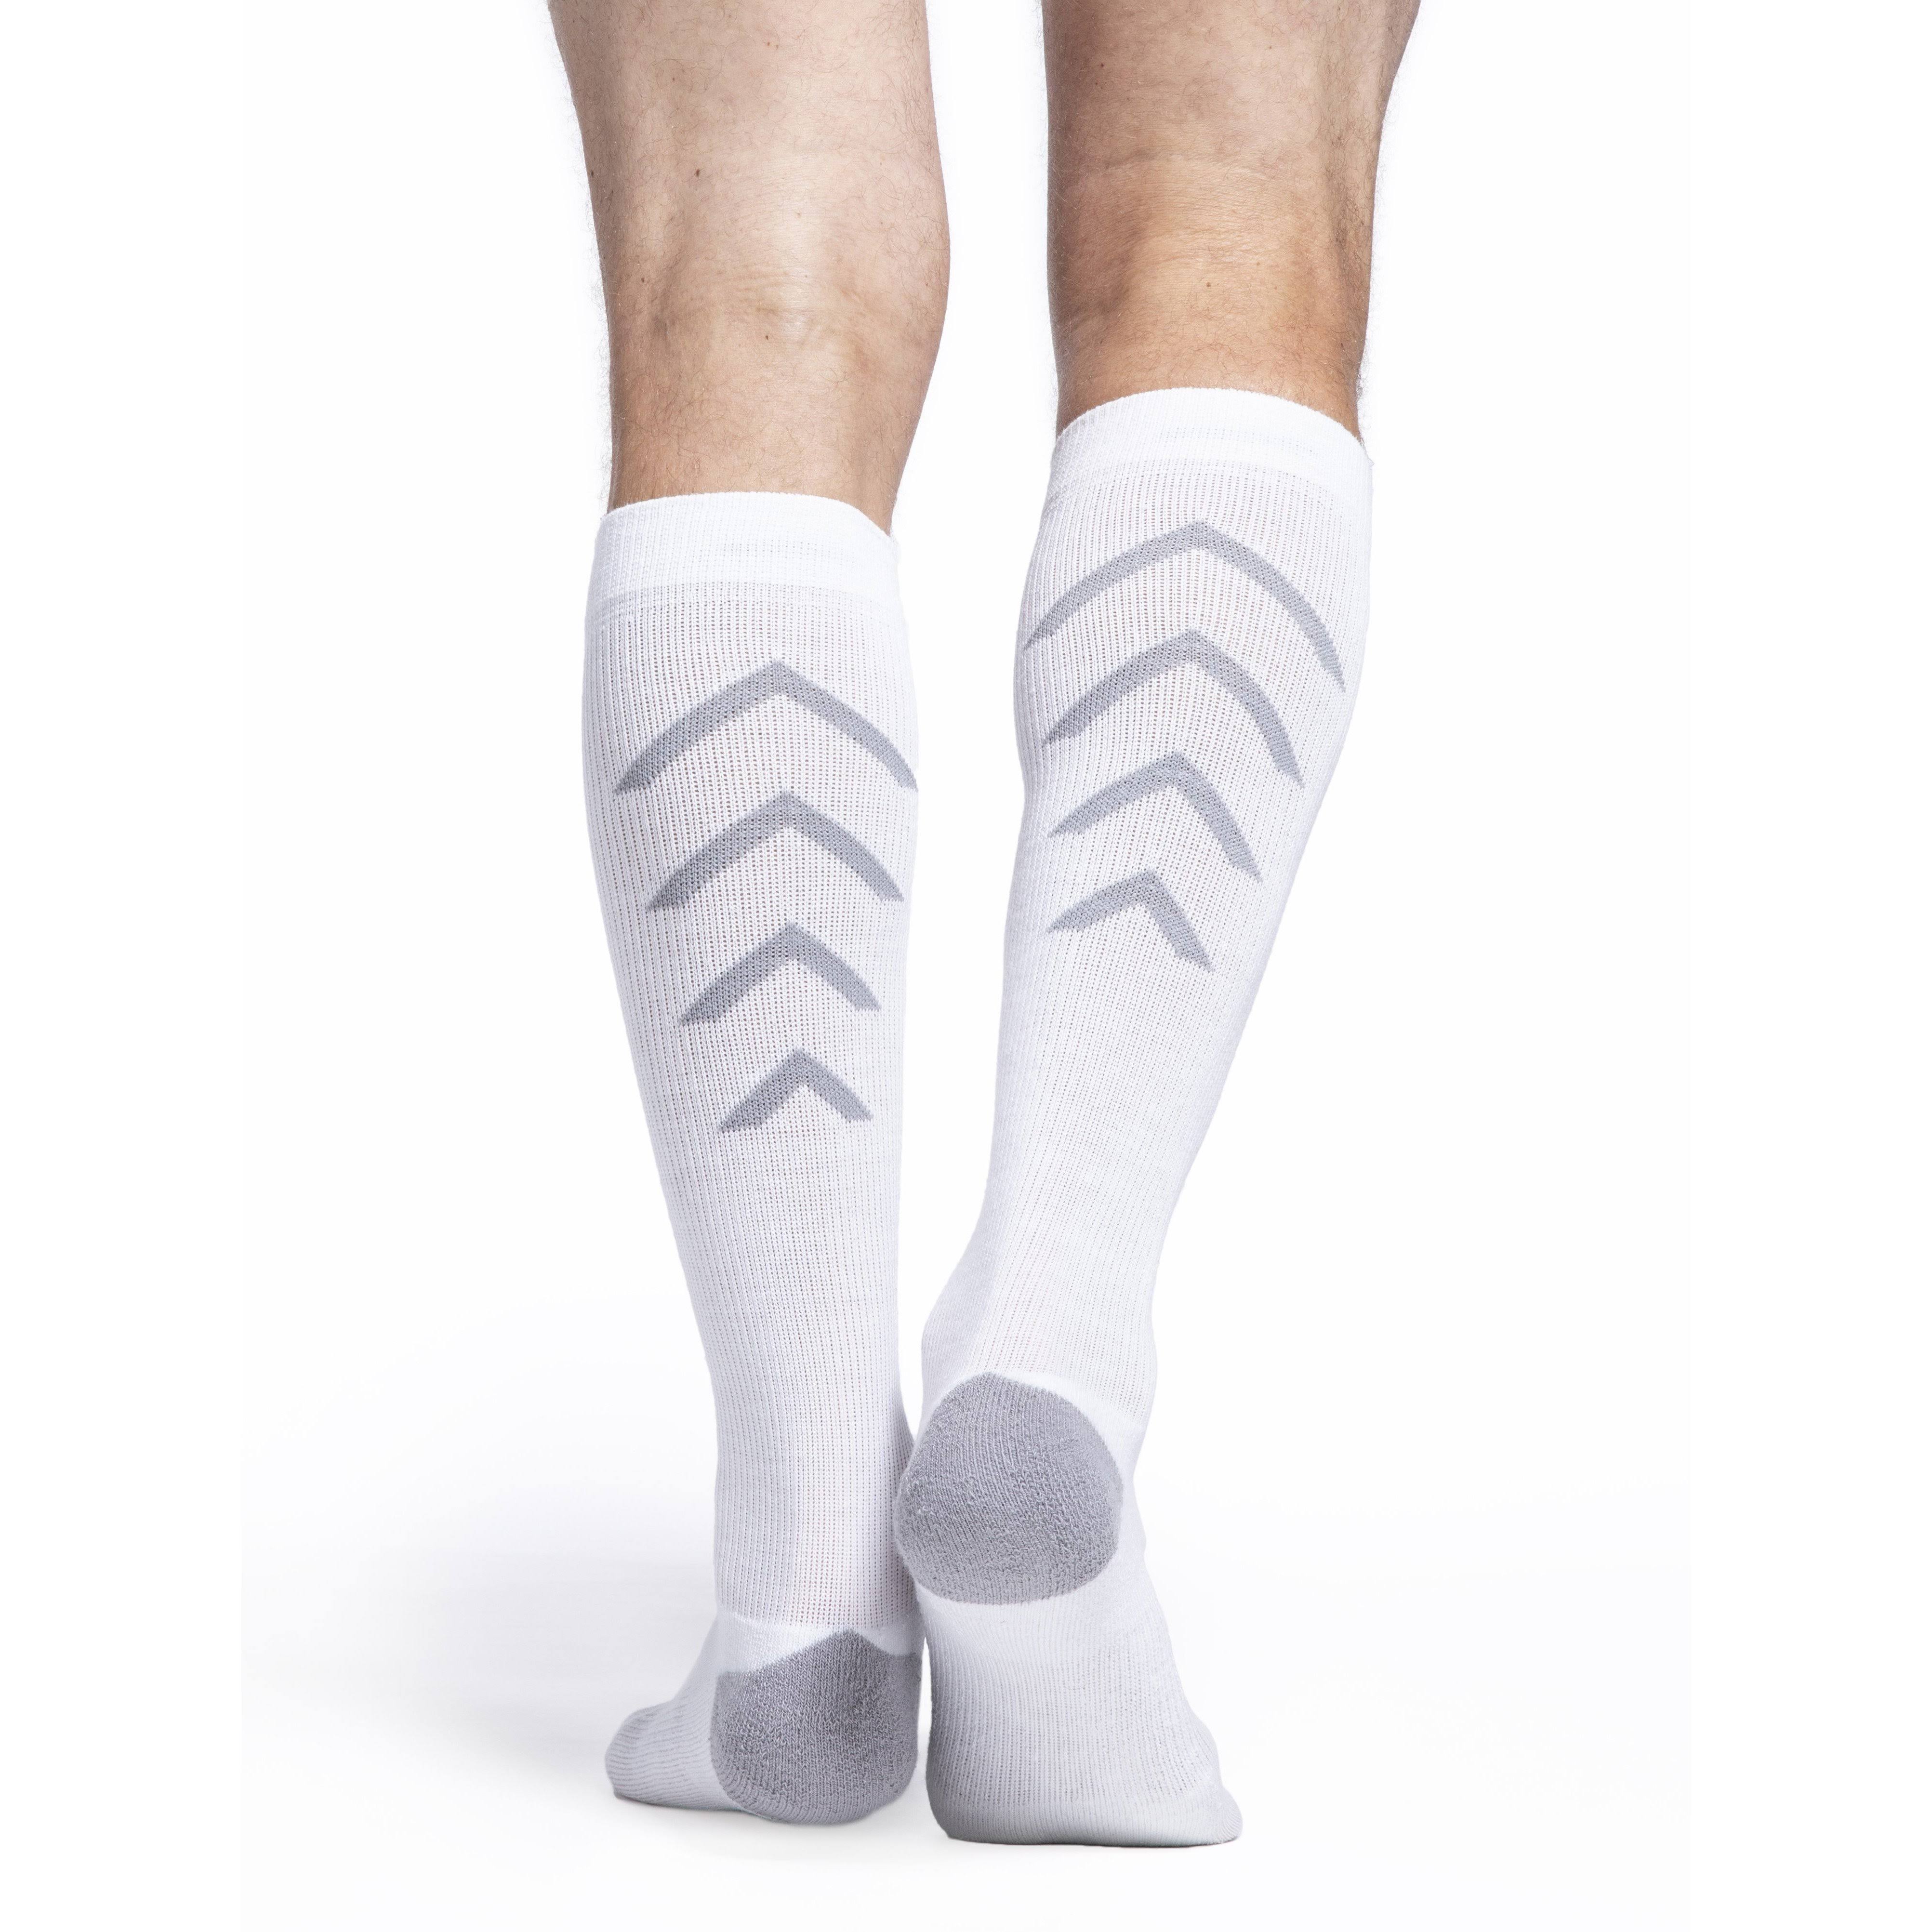 Sigvaris 15-20mmhg Athletic Recovery Socks - White, Small